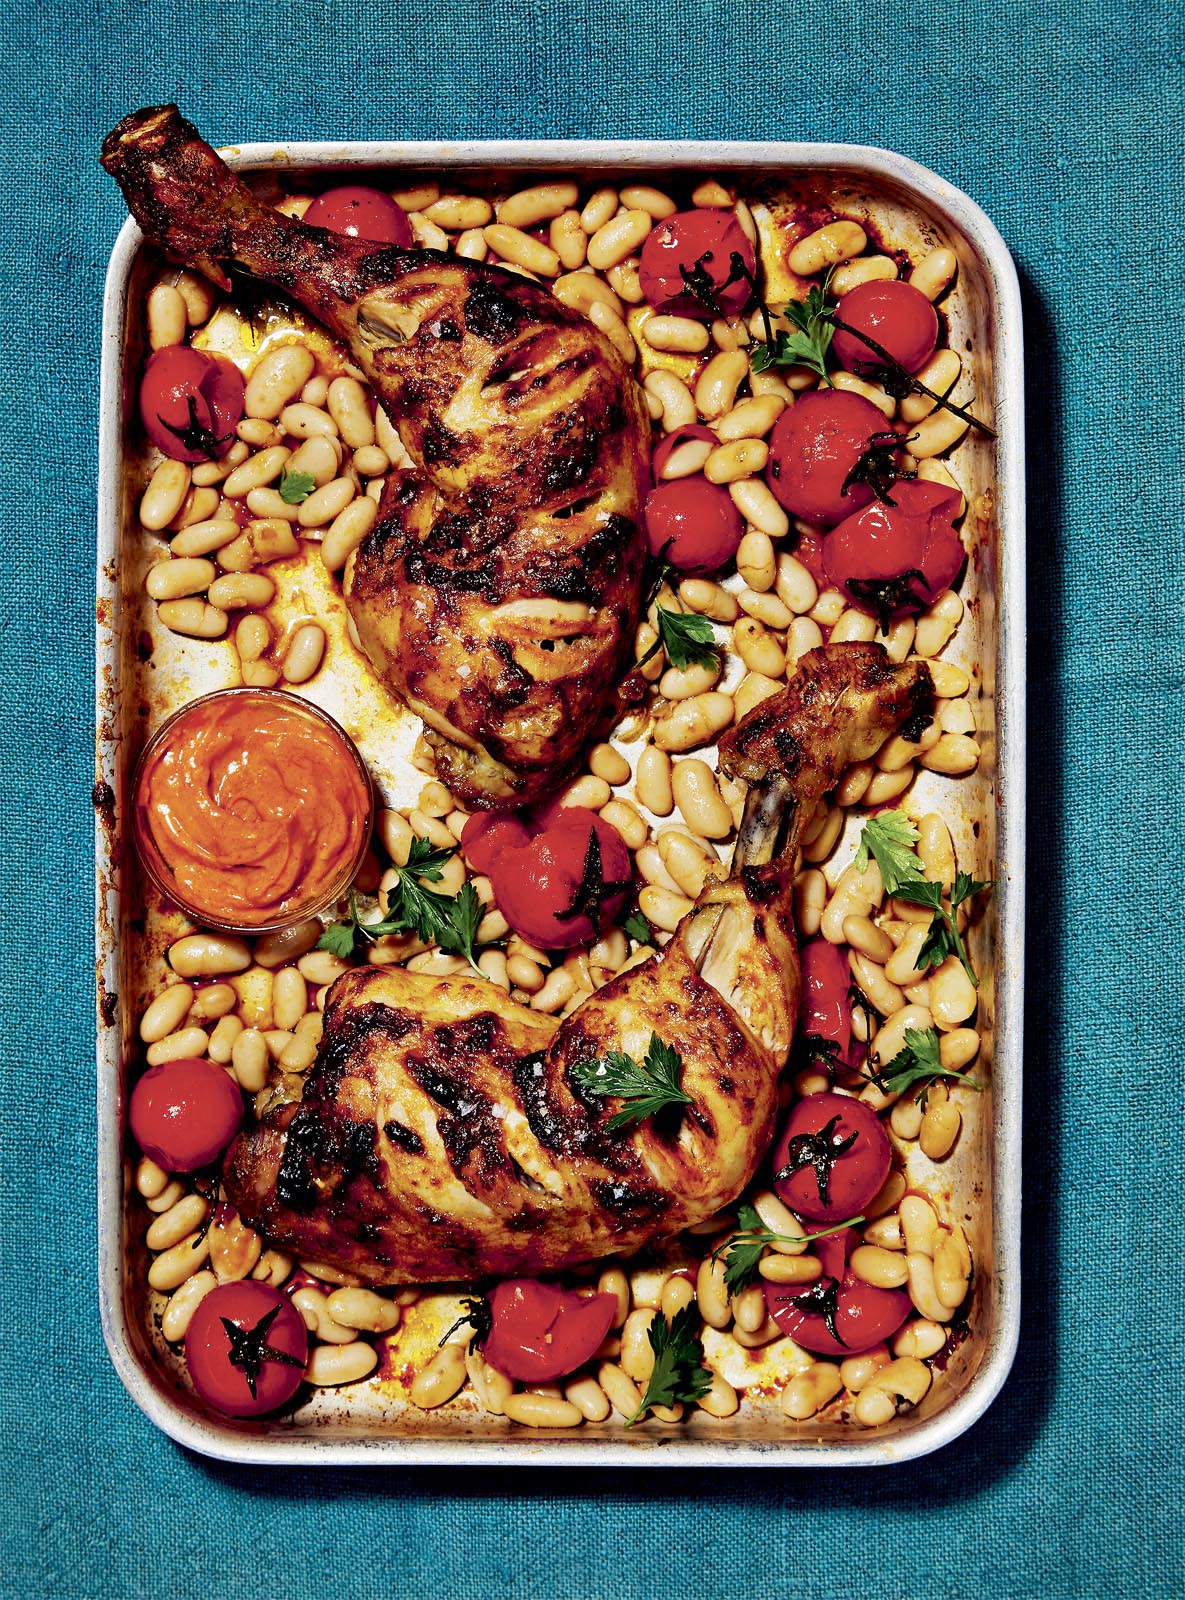 Smoky paprika chicken with warm cannellini beans